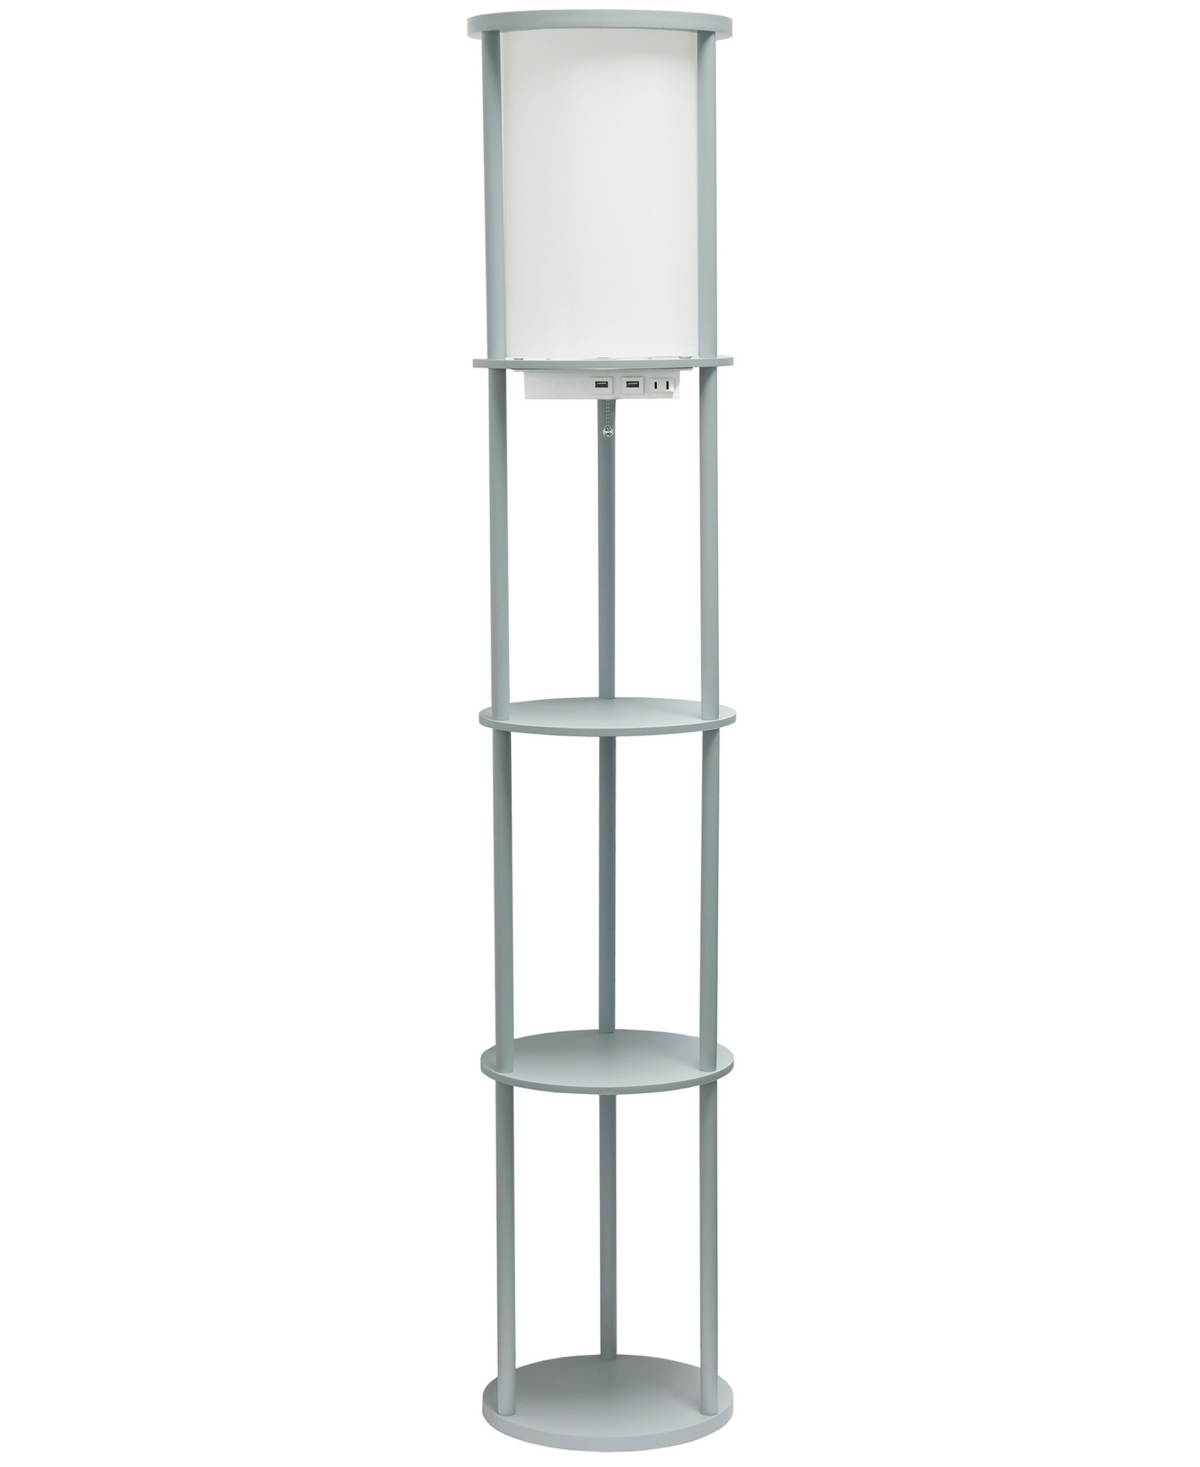 All The Rages Etagere Organizer Storage Floor Lamp With 2 Usb Charging Ports, 1 Charging Outlet In Gray